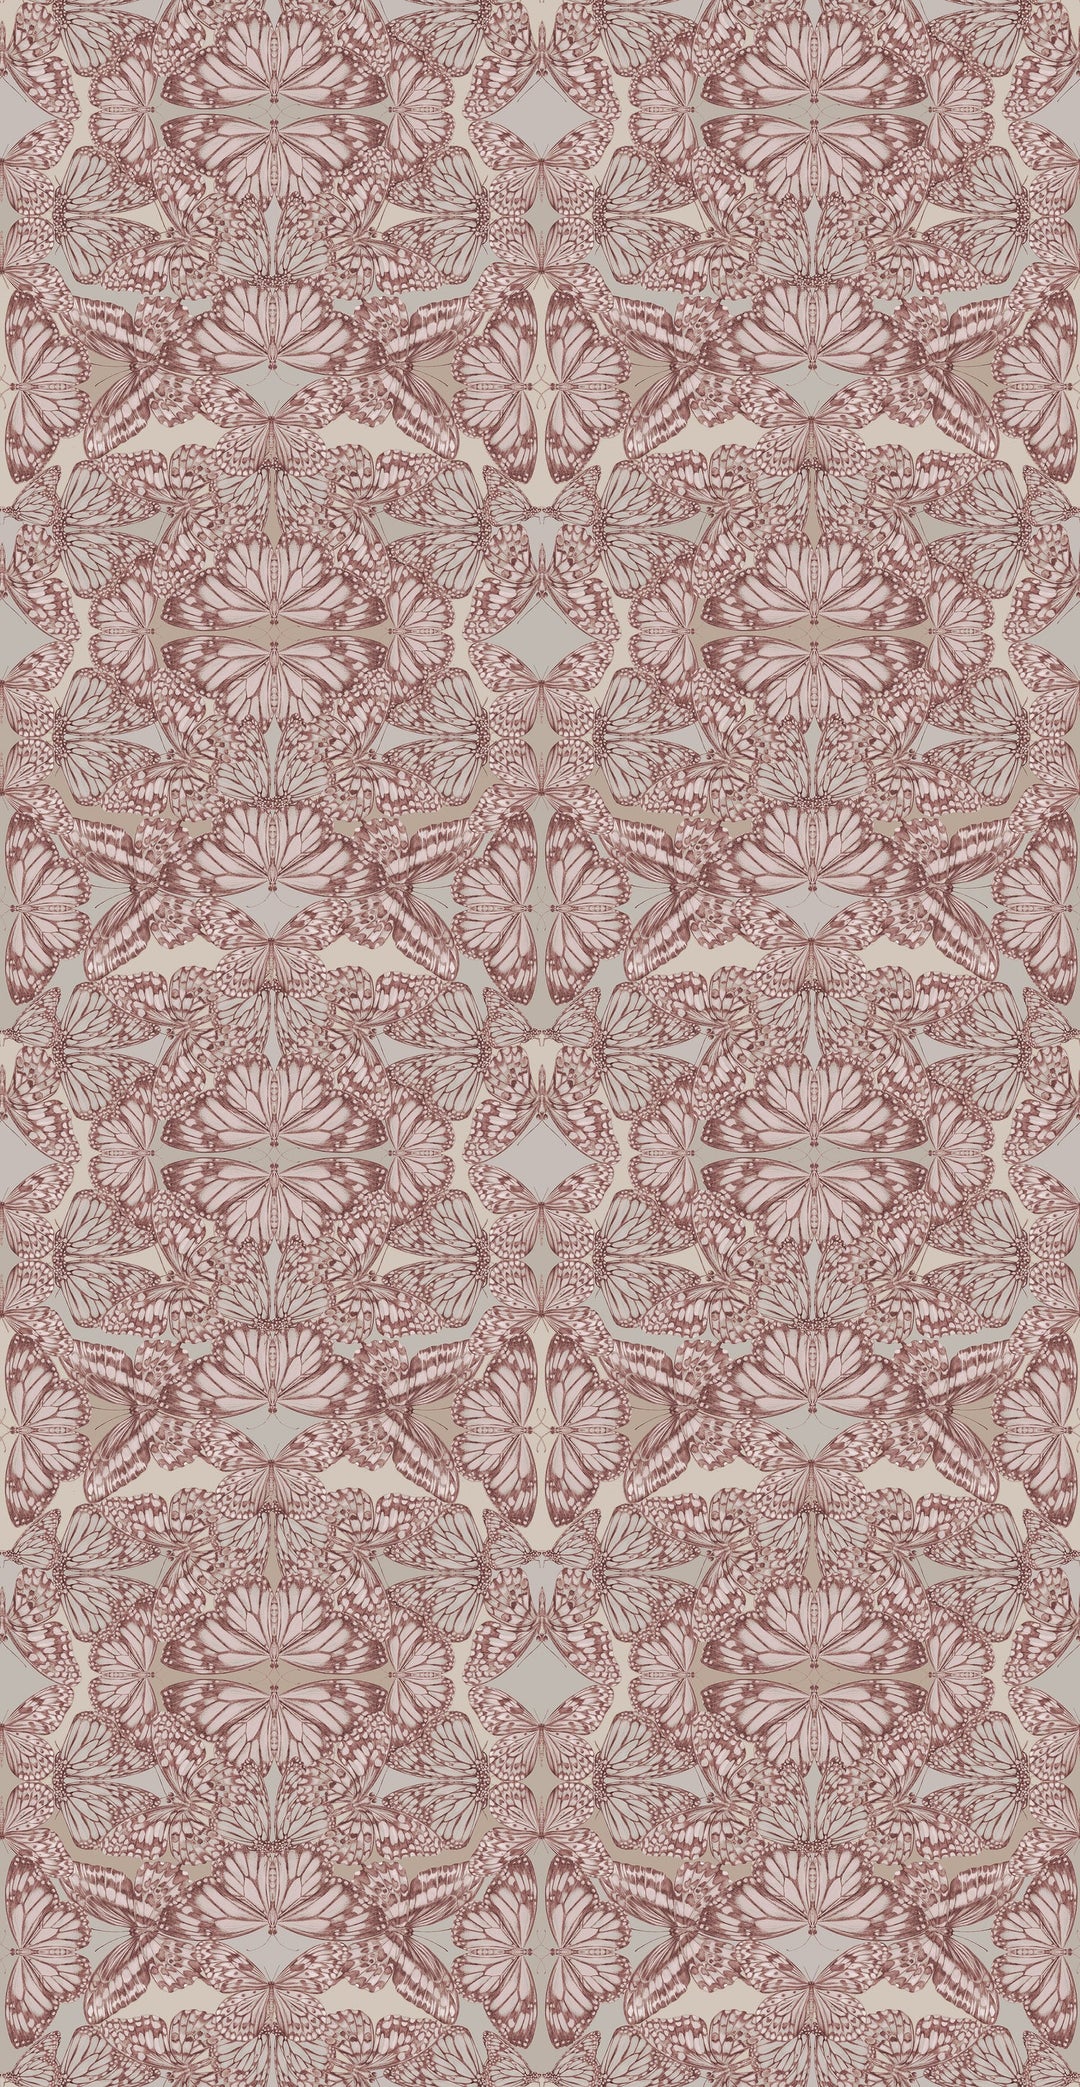 Victoria-Sanders-Papilio-butterfly-kaleidoscopic-print-hand-drawn-repeat-wallpaper-Rosa-pink